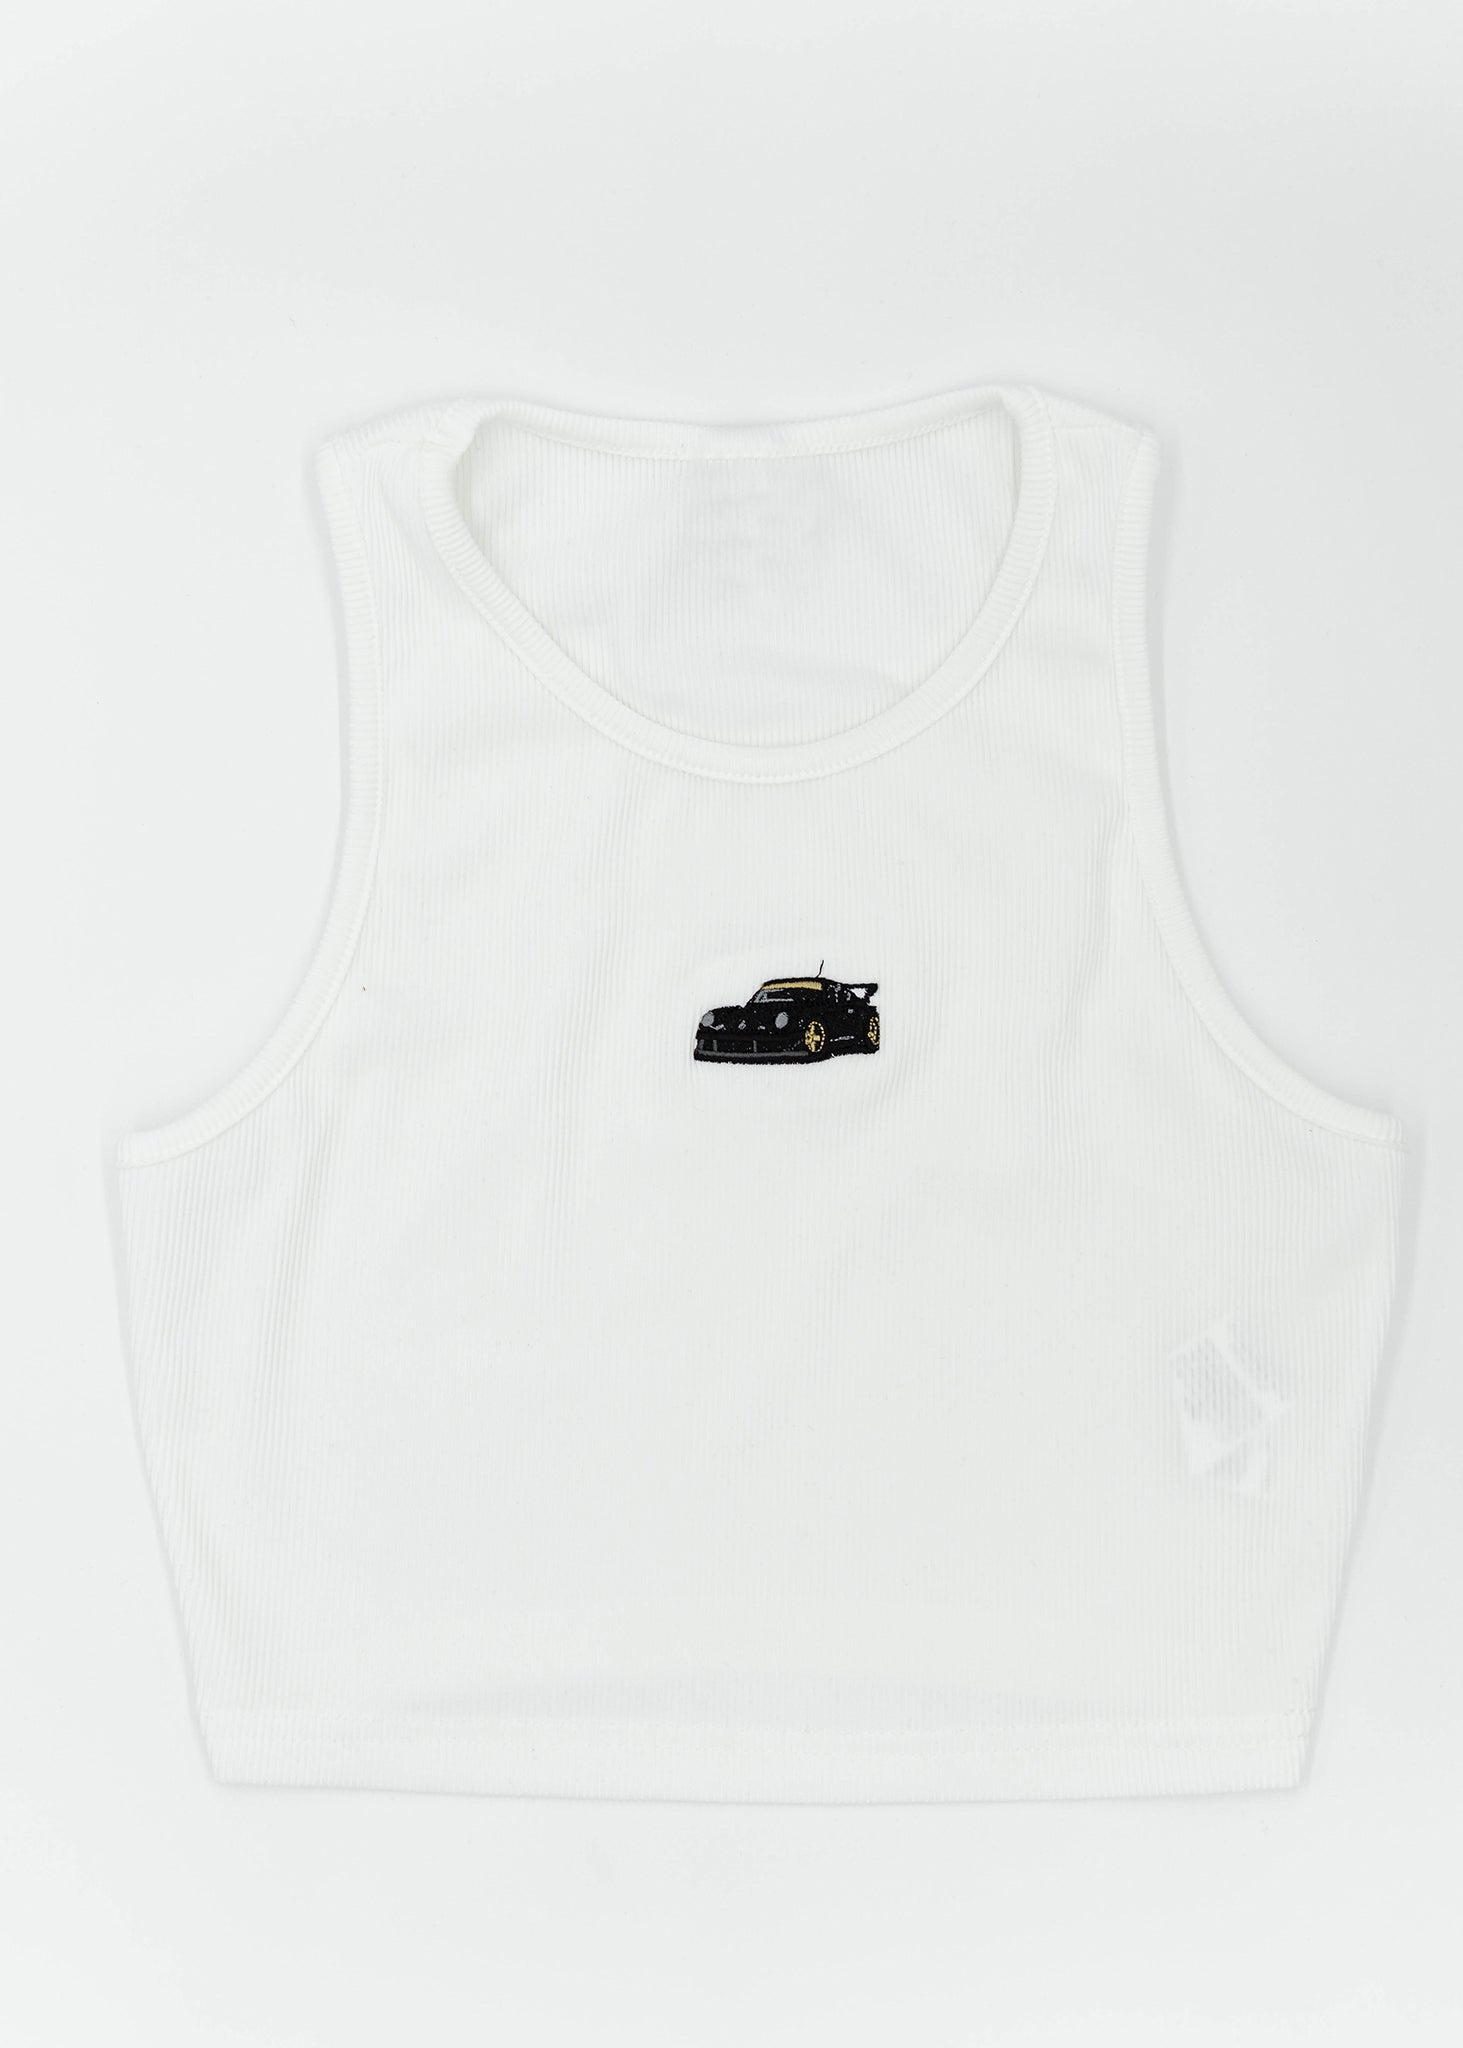 A white ribbed stretchy crop top with embroidery of a small RWB 930 911 Turbo - Akira Nakai "Stella Artois" on the front. Full size front view of the white shirt with an embroidered RWB 930 911 Turbo. Fabric composition of this top is 95% polyester, and 5% elastane. The material is very stretchy, and form fitting. The style of this shirt is scoop neck, sleeveless, cropped at the waist, with embroidery in the middle.